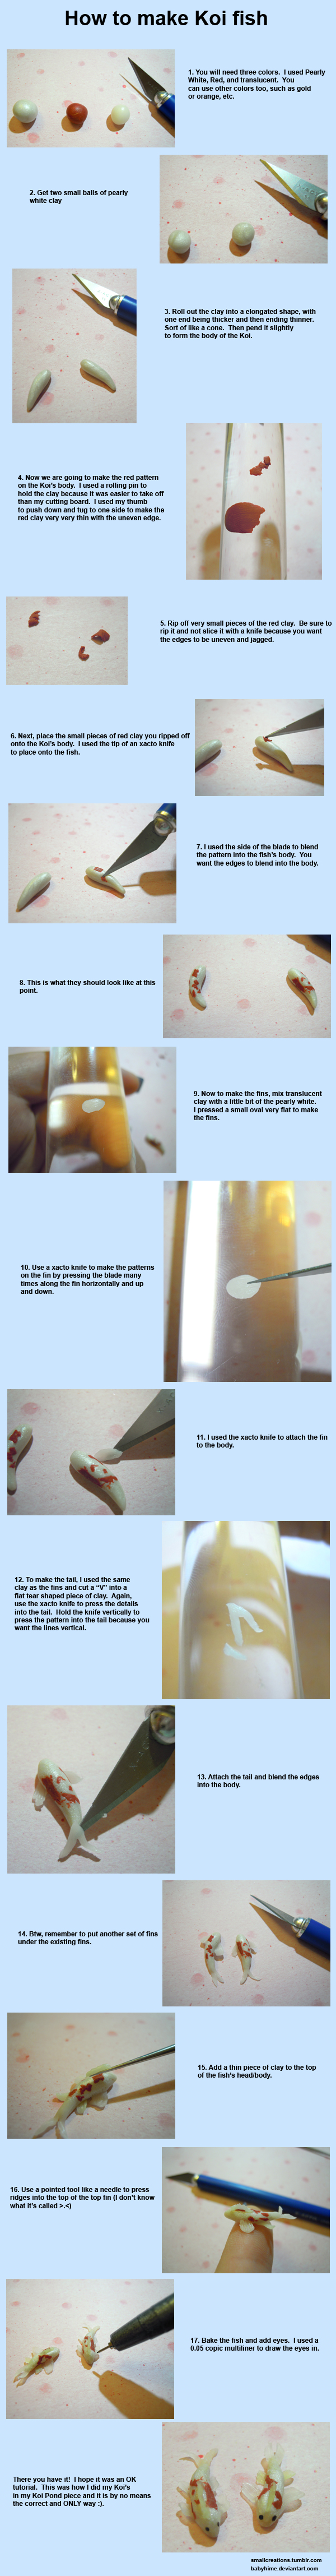 koi_tutorial_from_polymer_clay_1_3_by_babyhime-d4ruvpm.jpg